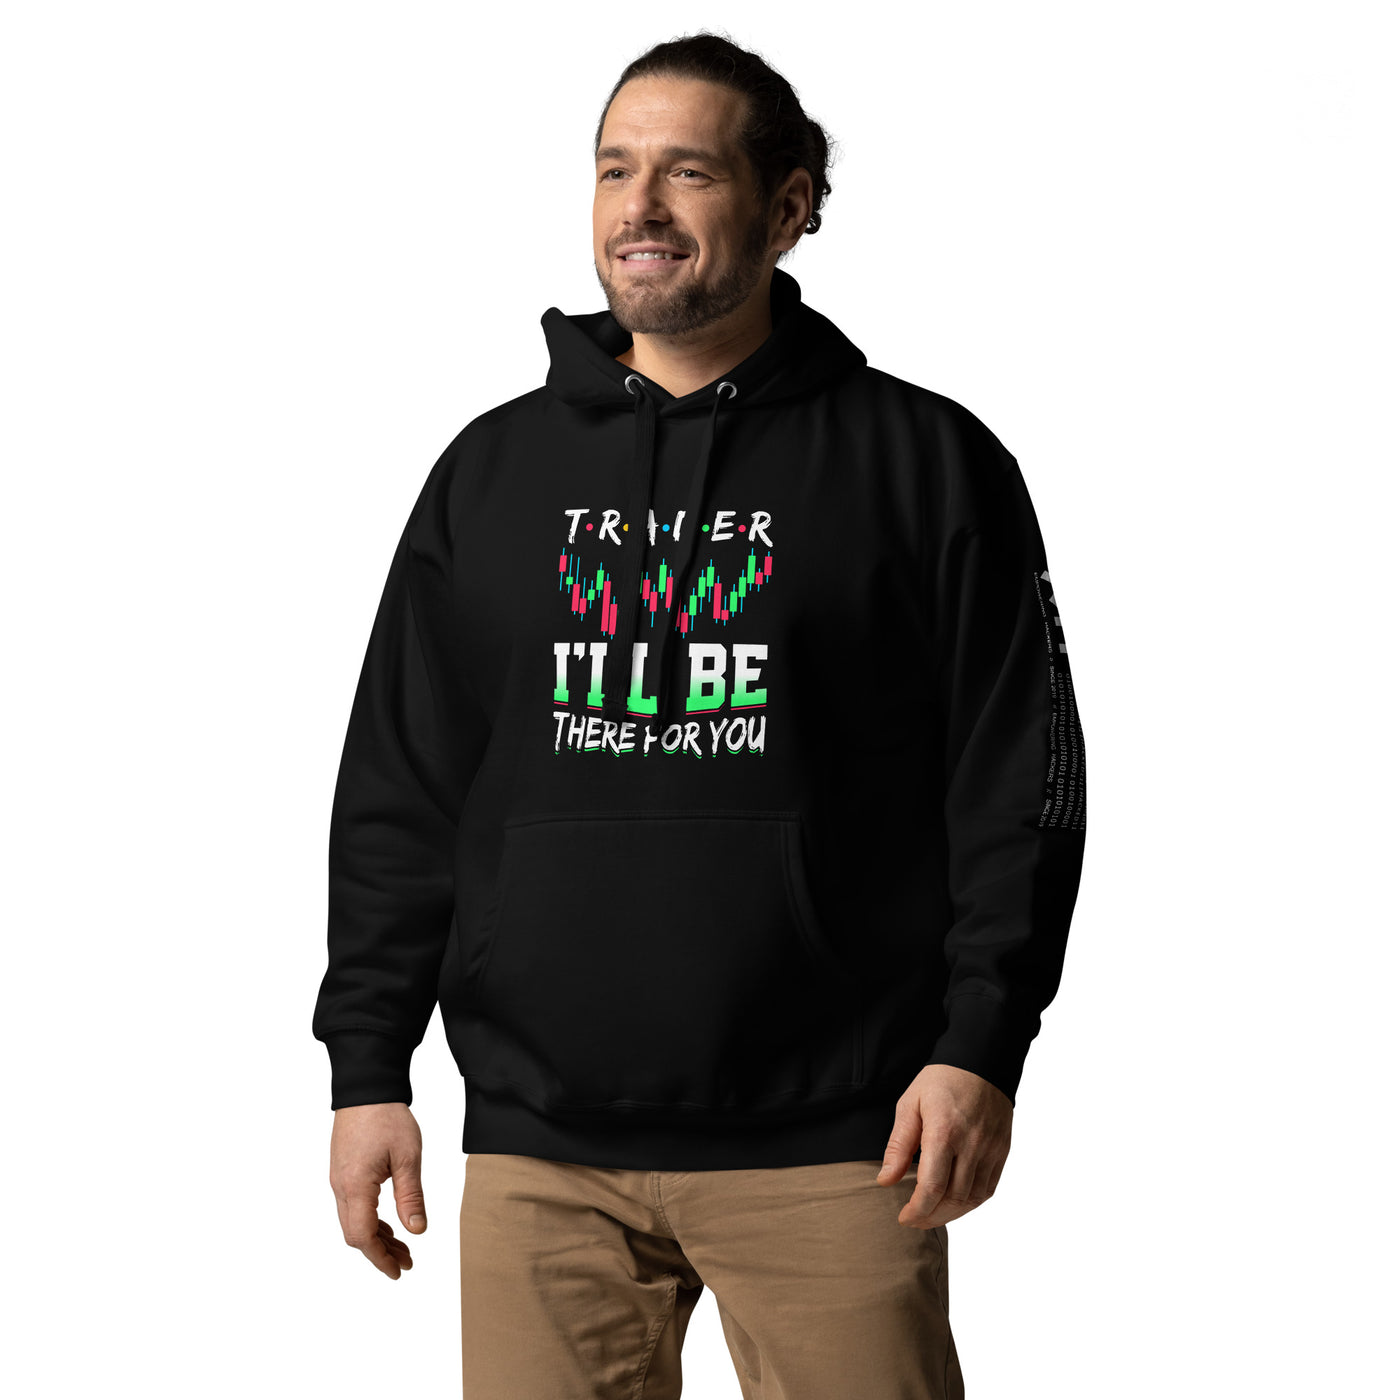 Trader: I'll be there for you - Unisex Hoodie